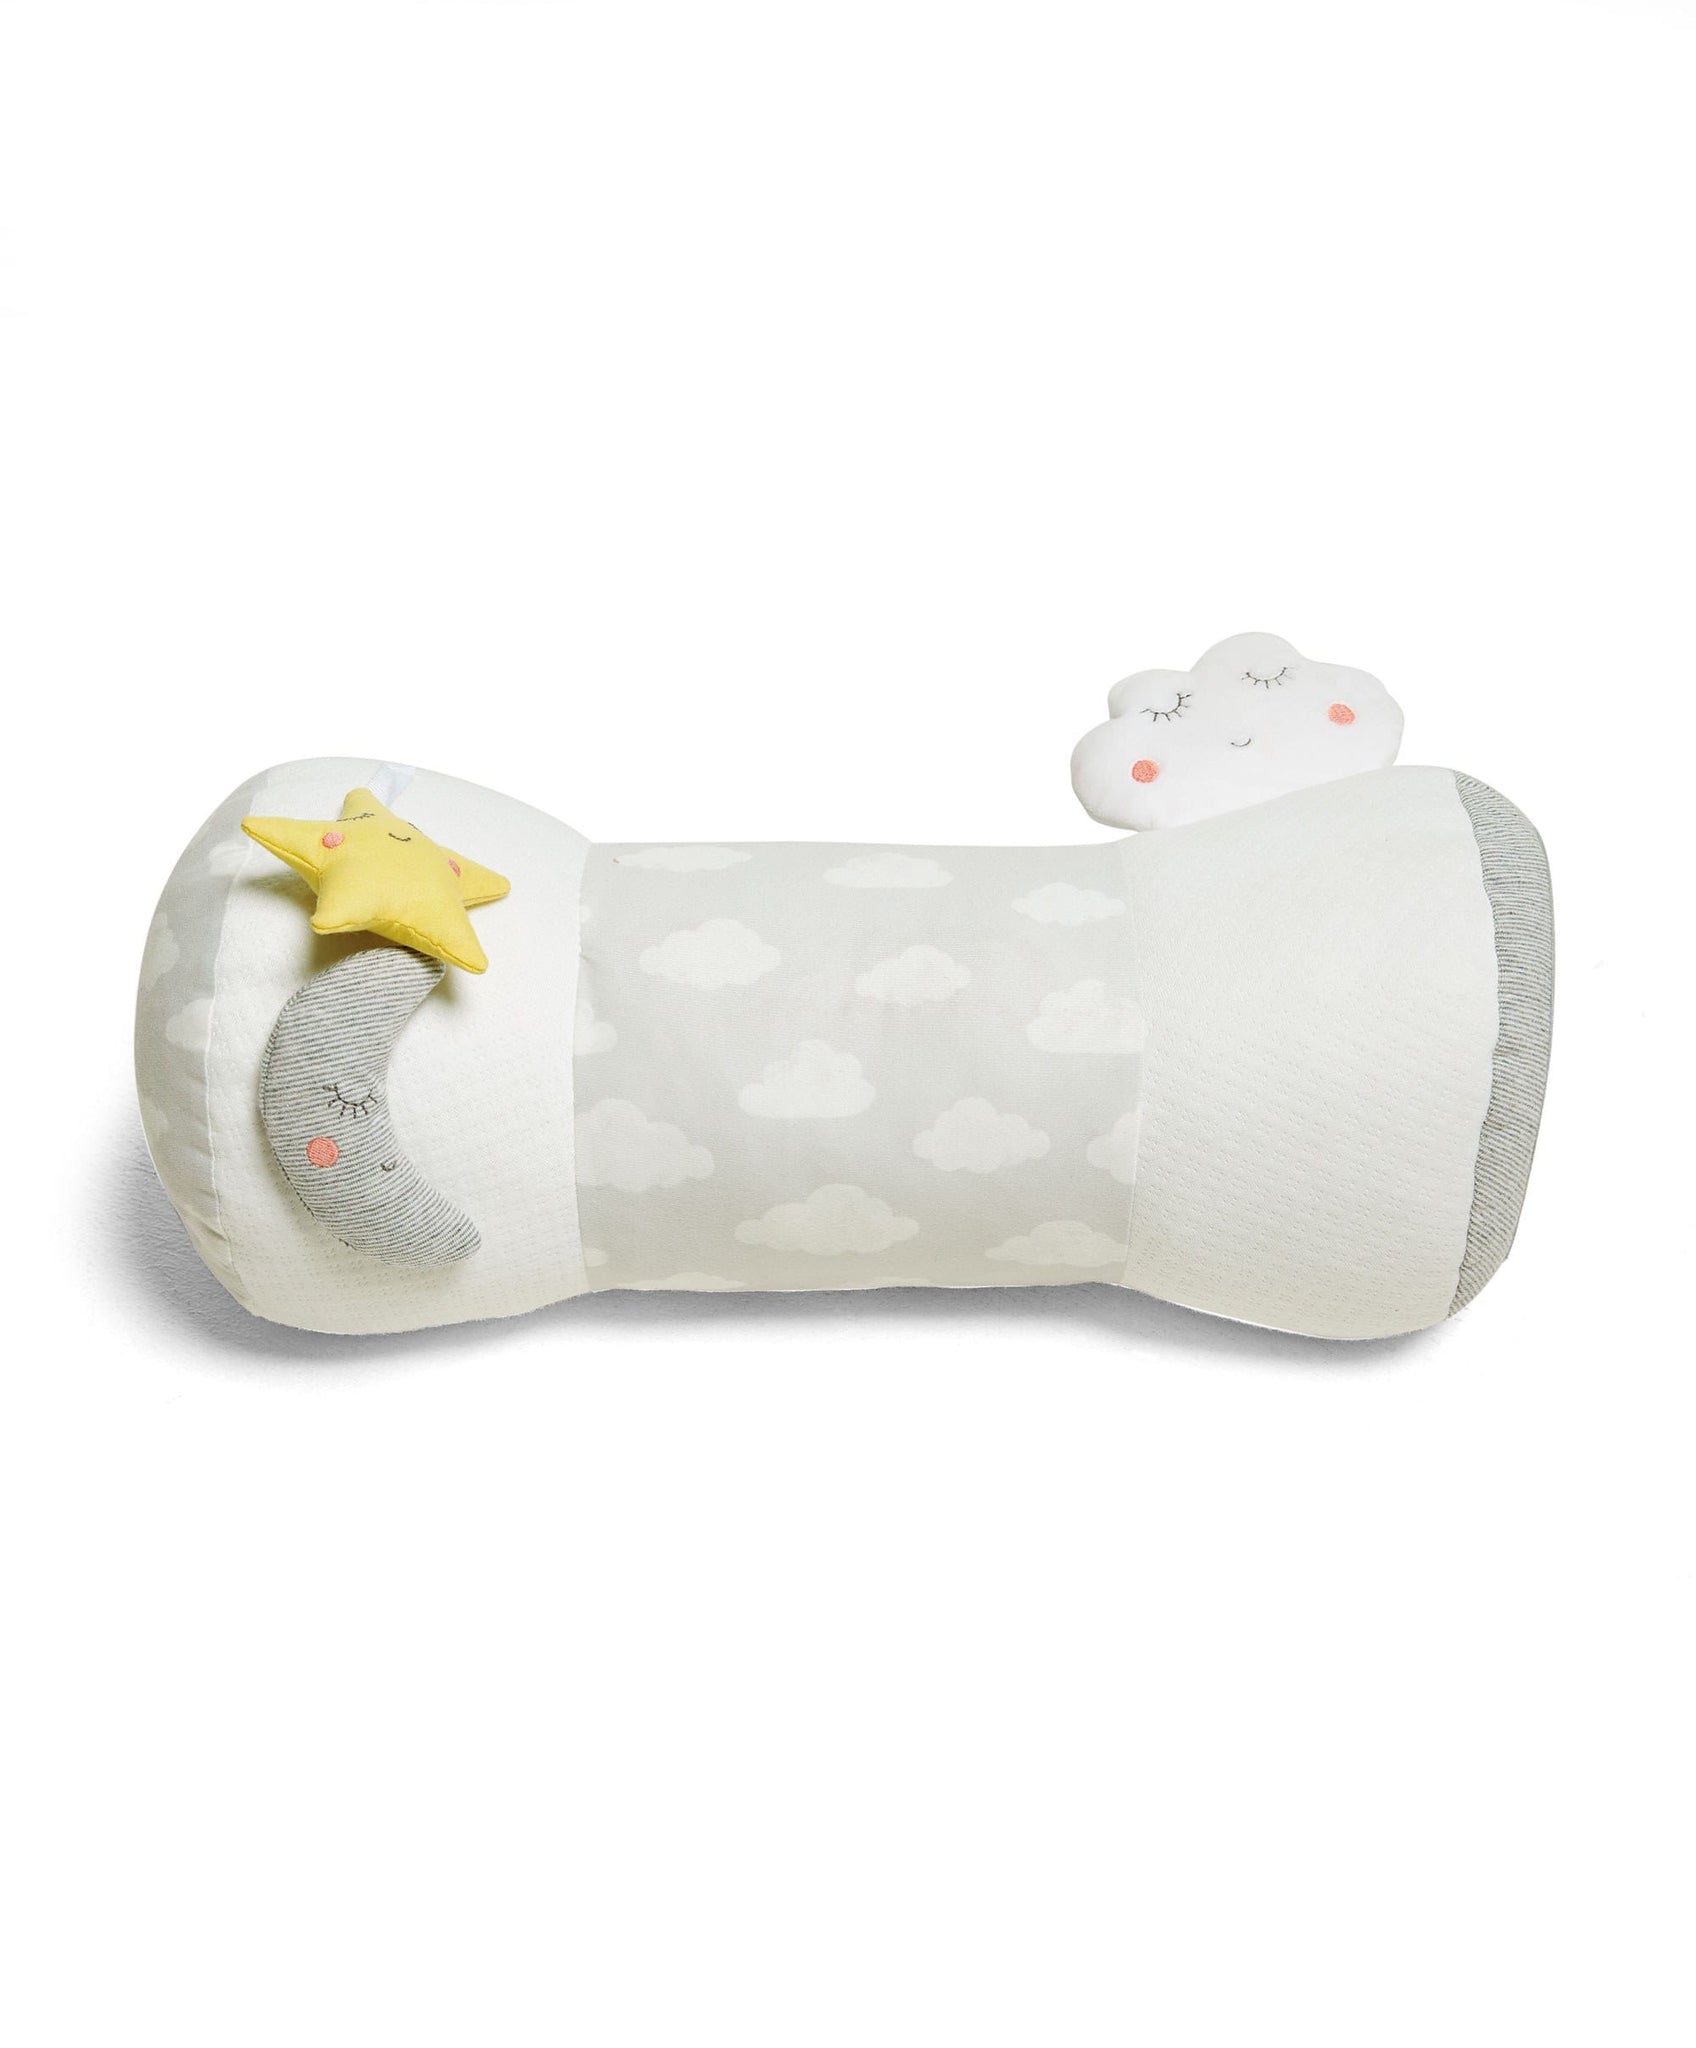 Boy Christening Gifts  Puppy Chime Rattle –